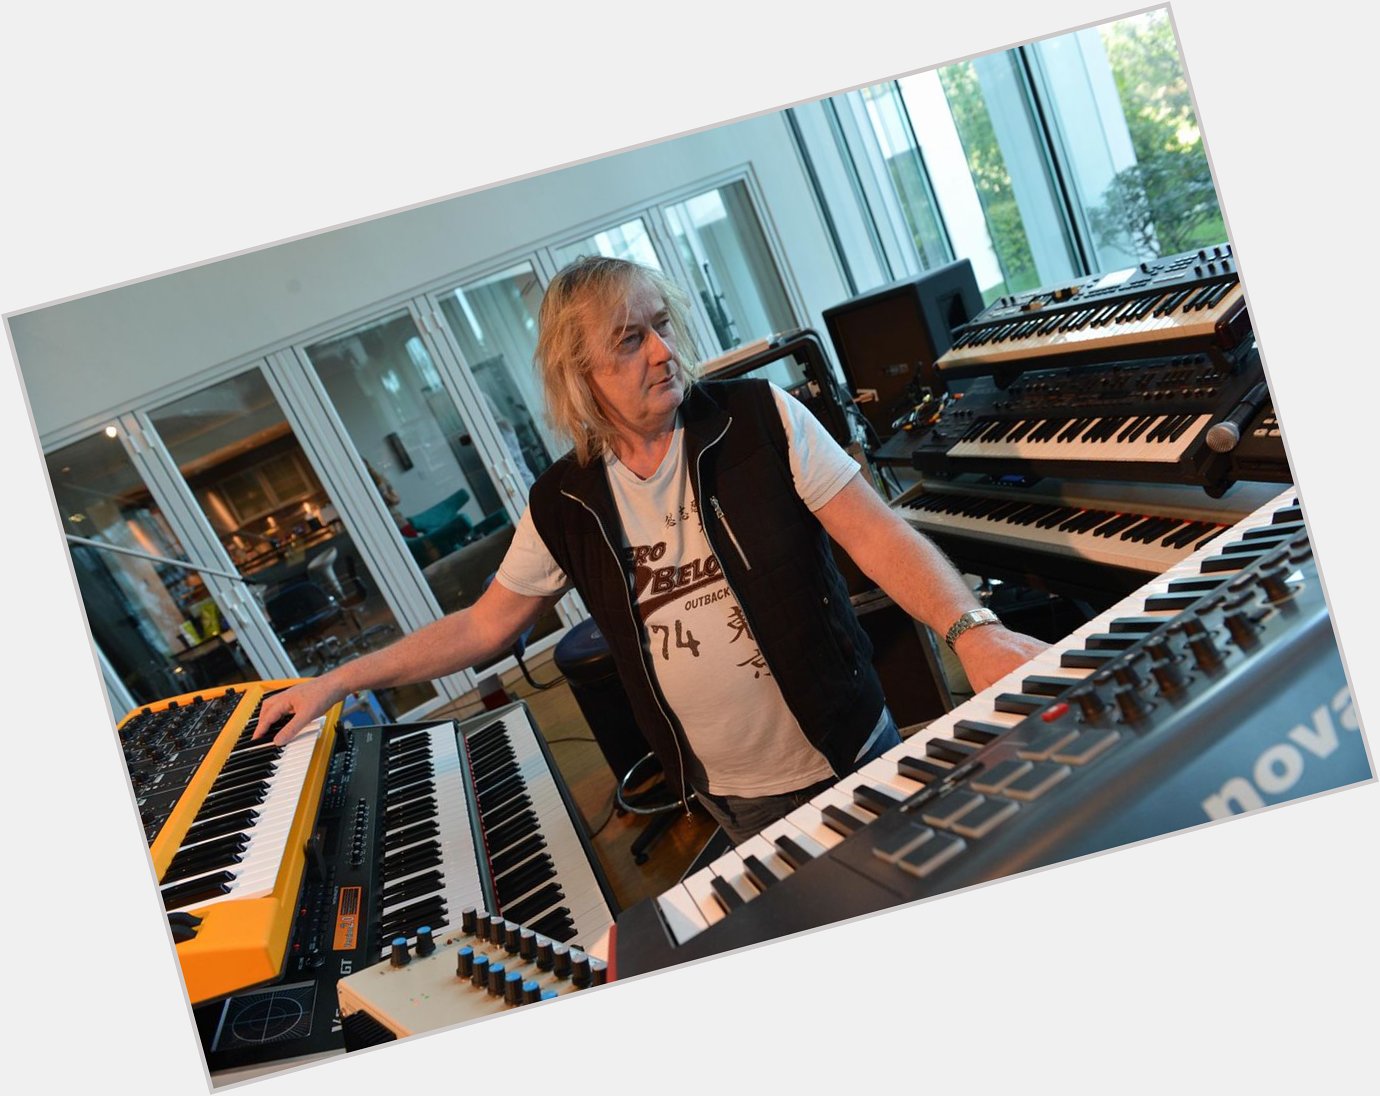 Happy Birthday Geoff Downes ( YES-ASIA-BUGGLES ) - August 25, 1952 - Run Through the Light . . . 